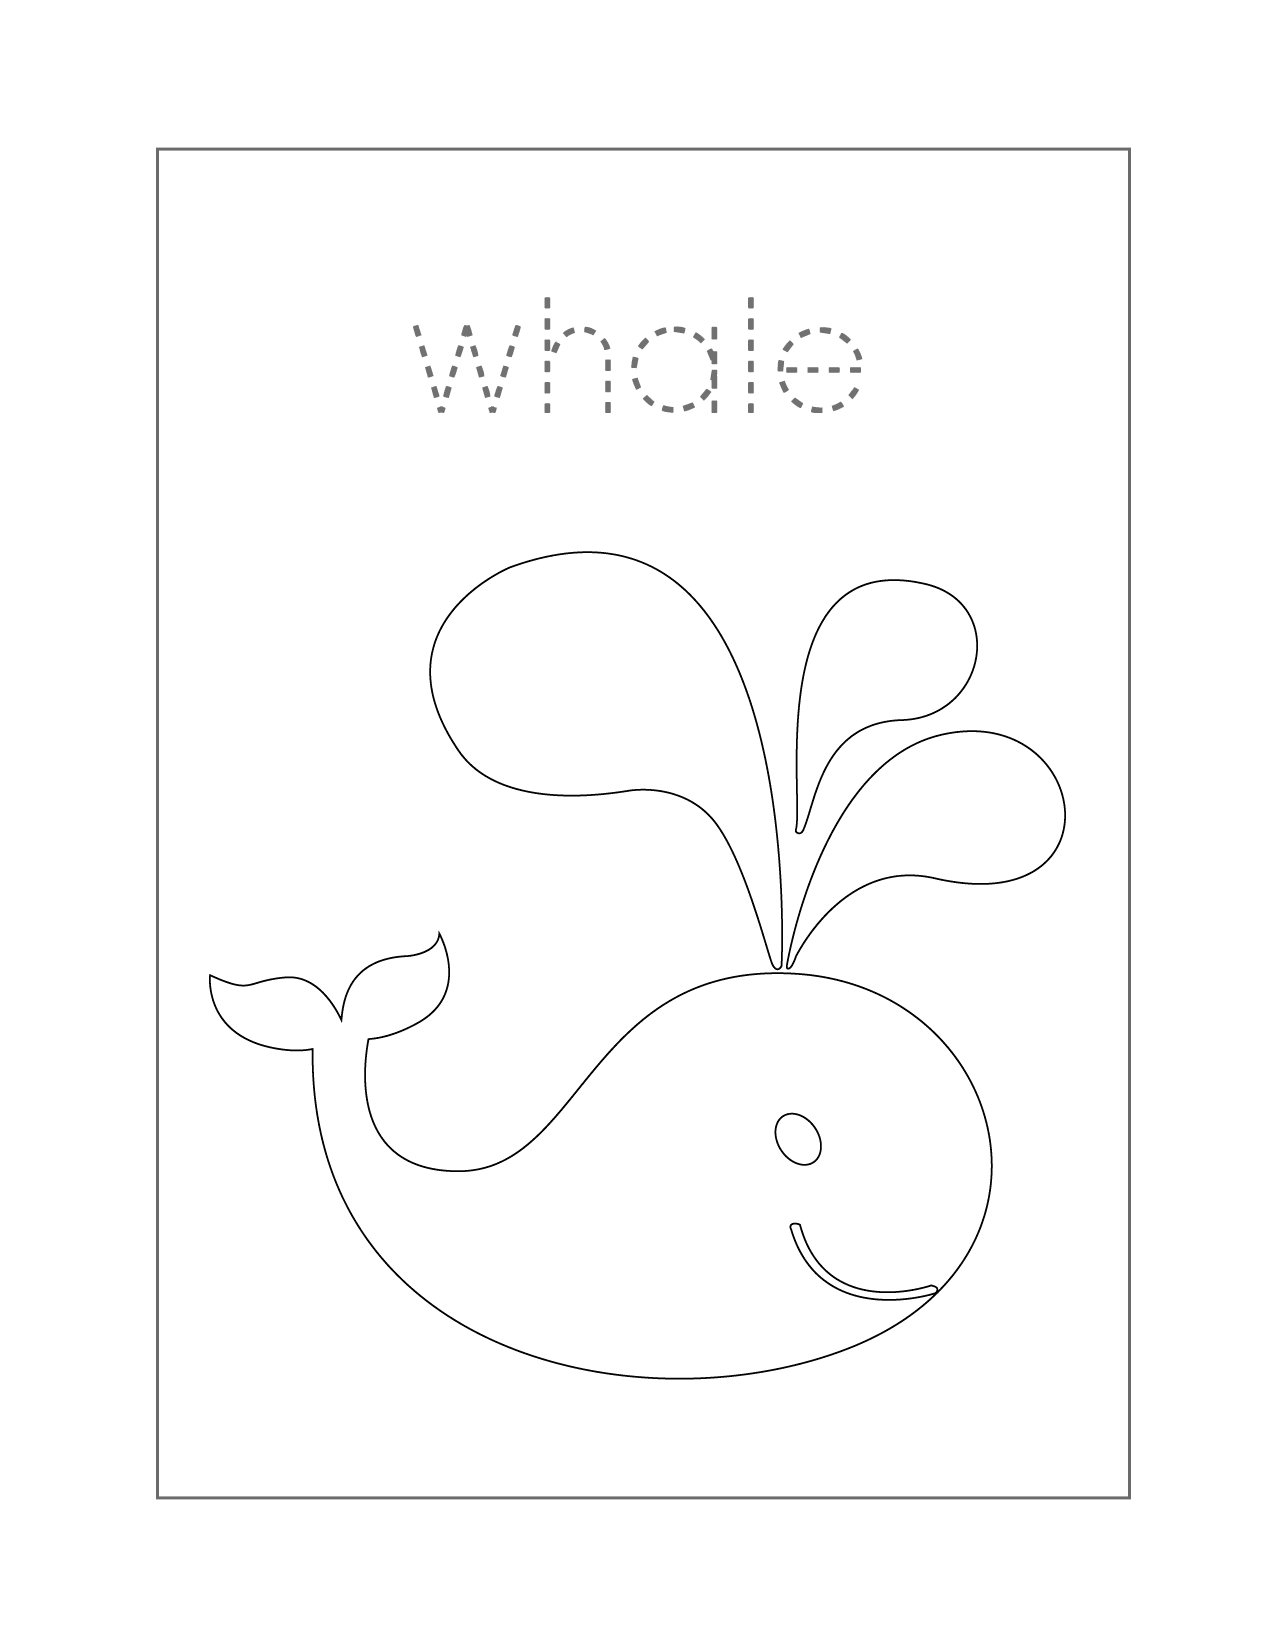 Whale Spelling And Coloring Page